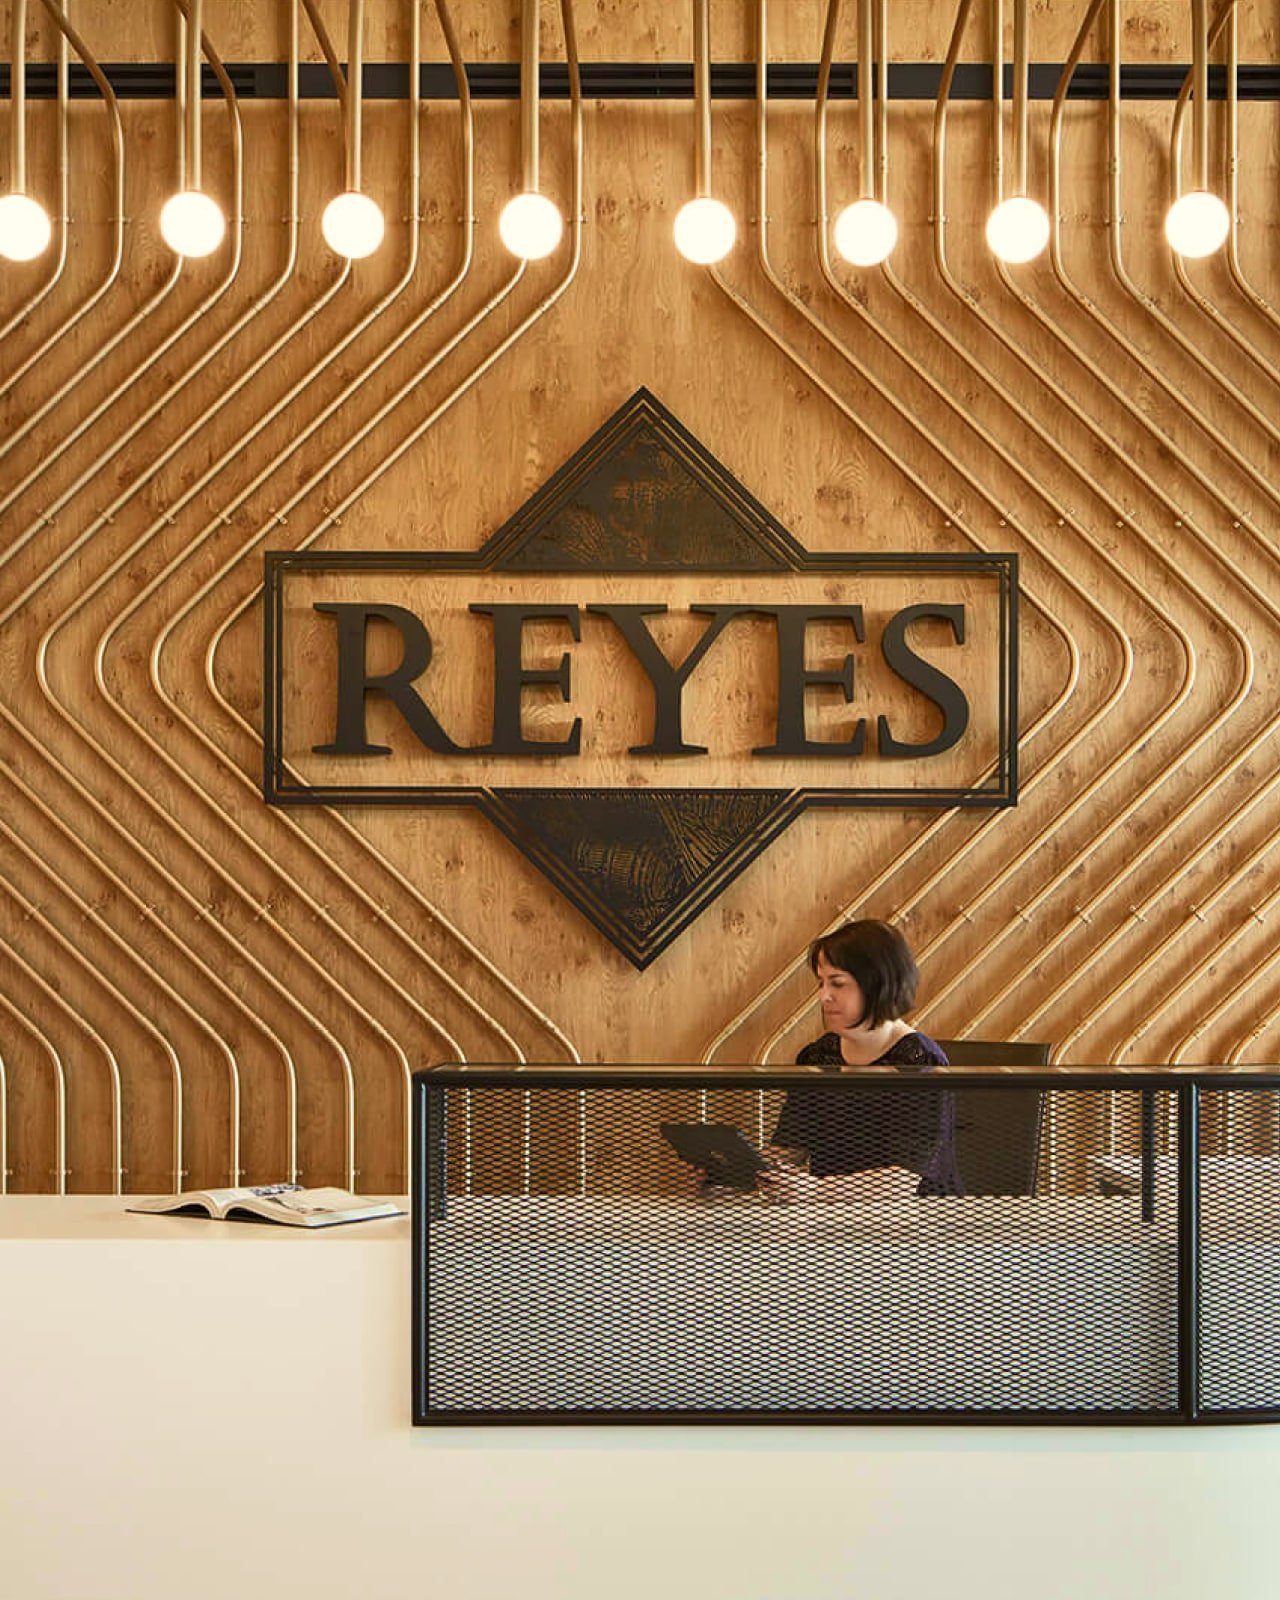 A wooden sign that shows the Reyes Beverage Group logo on a ornately designed light-colored wood wall with a woman sitting at a desk in front of it